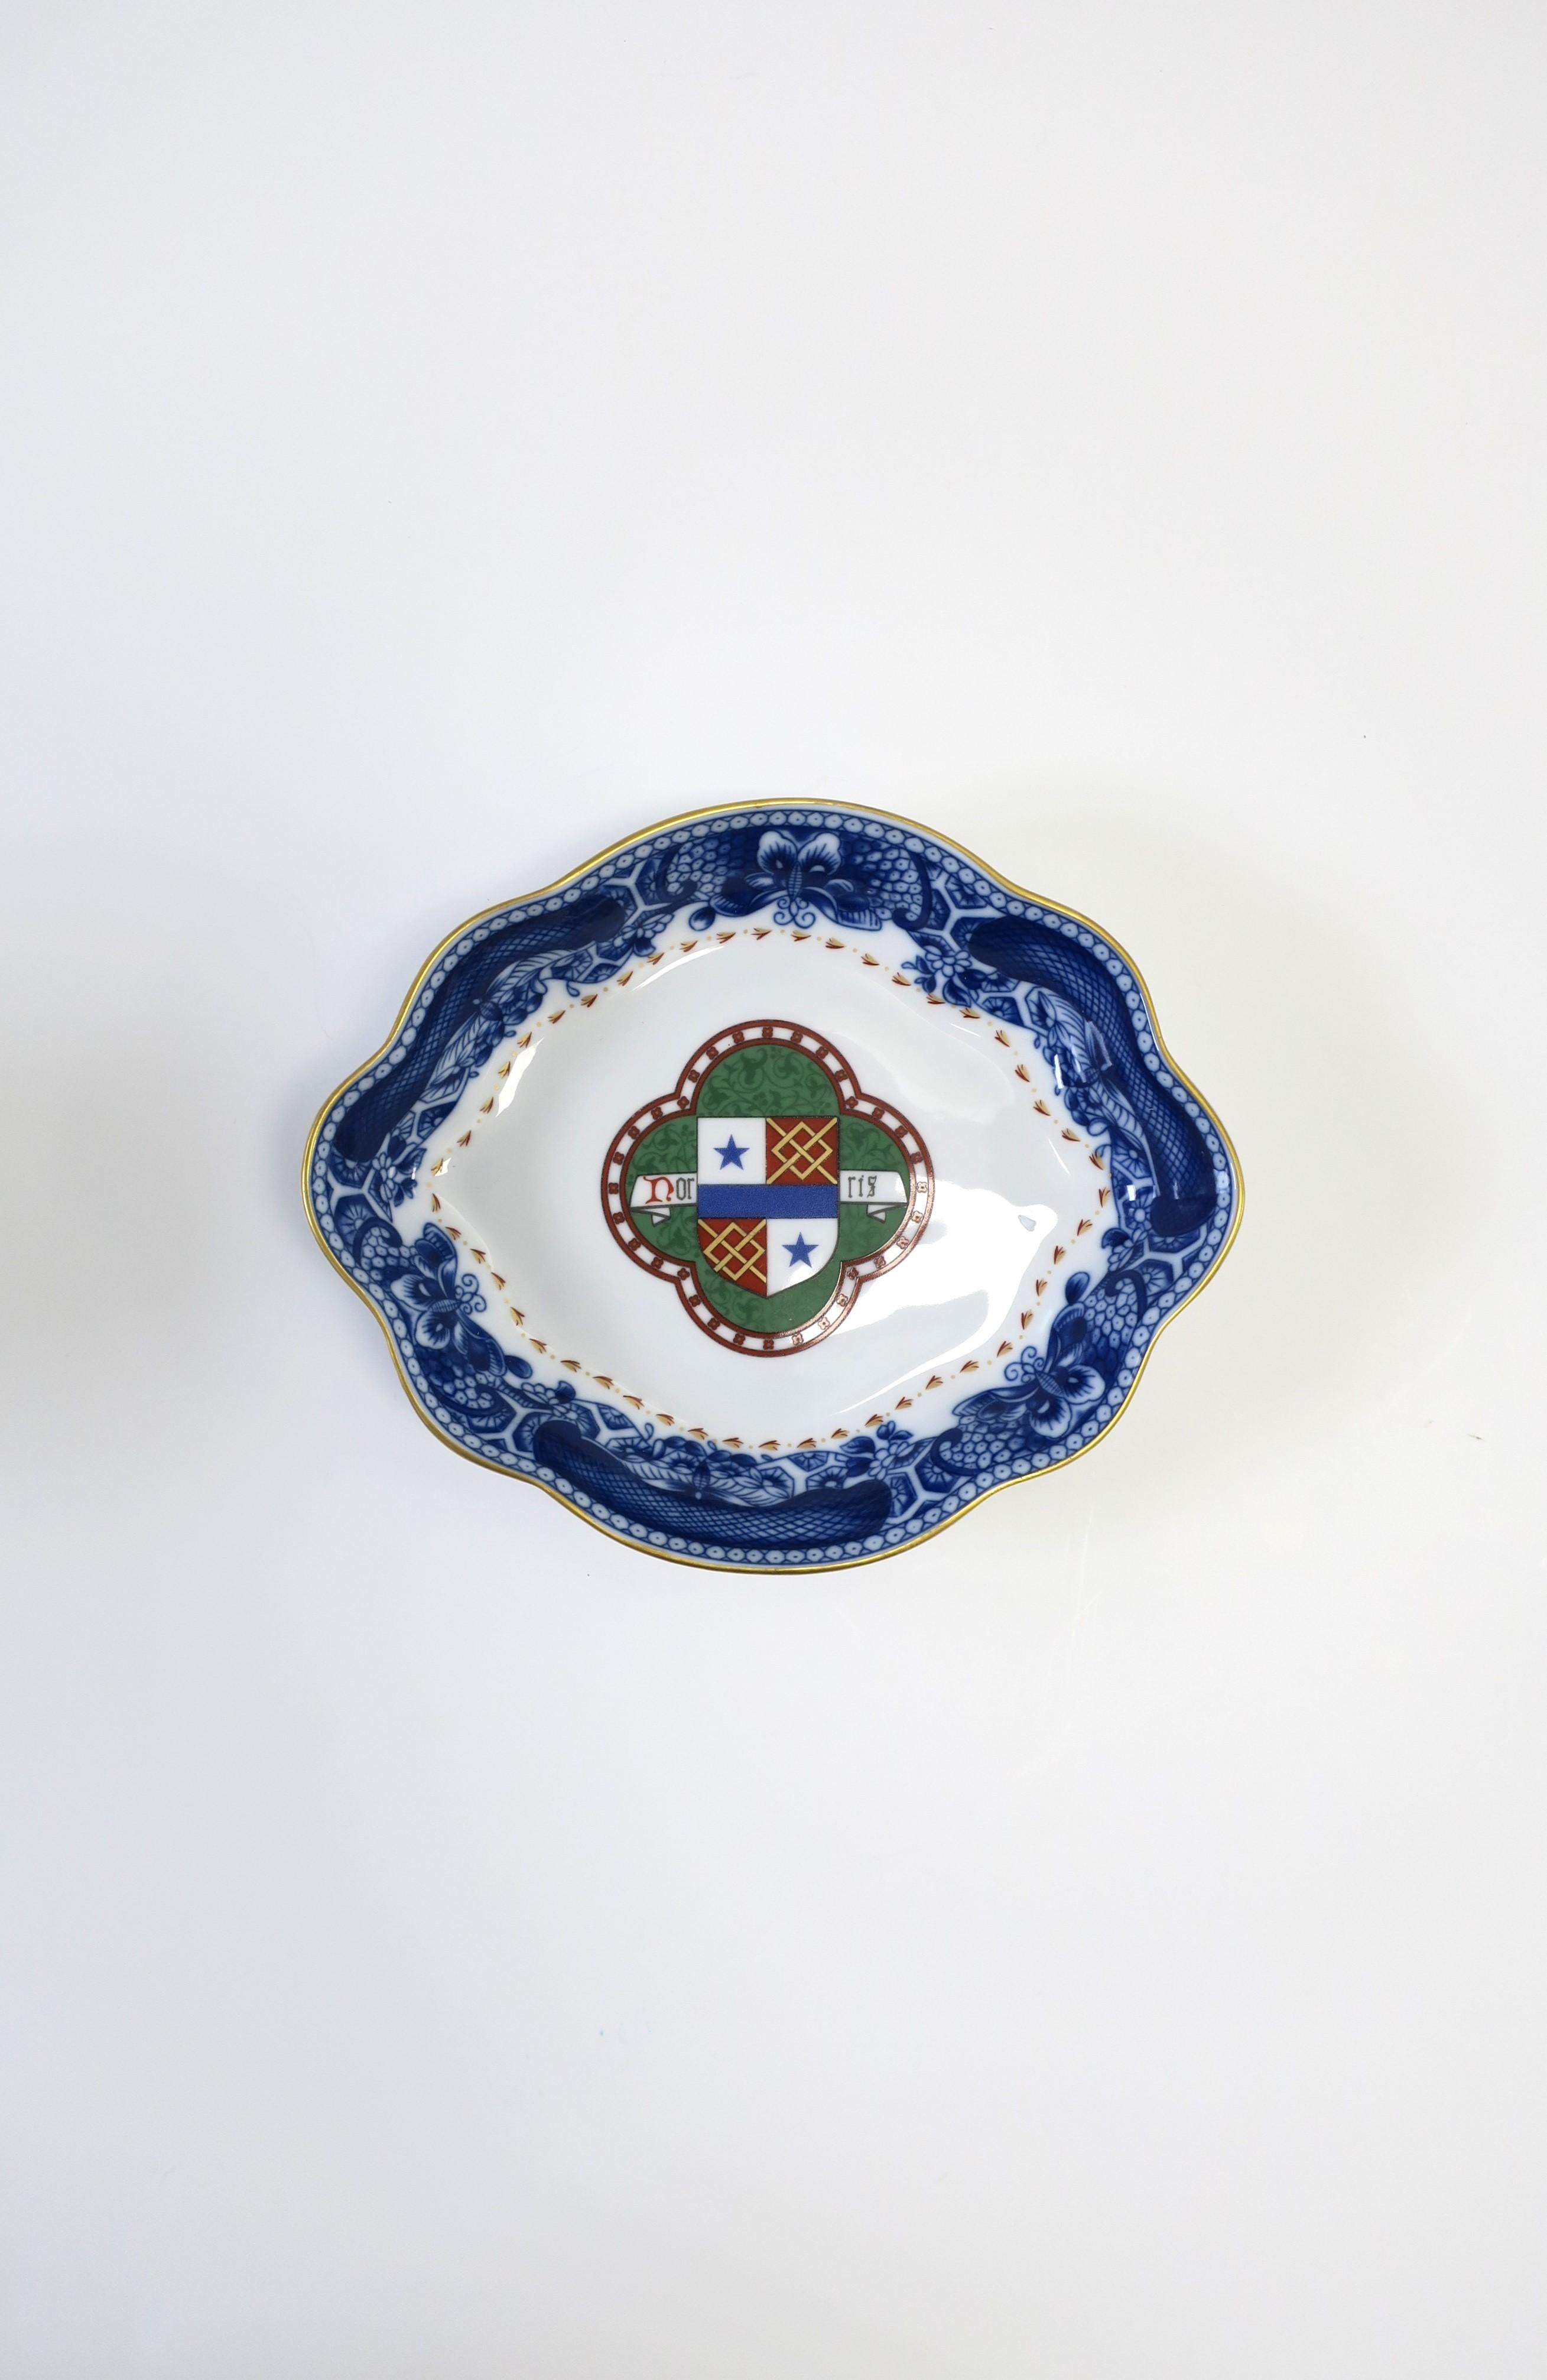 **There are 2 dishes available, each sold separately, as per listing. 

A beautiful blue and white dish vide-poche catchall with crest design by luxury porcelain maker, Mottahedeh, circa late-20th century, Portugal. Piece has a beautiful oval